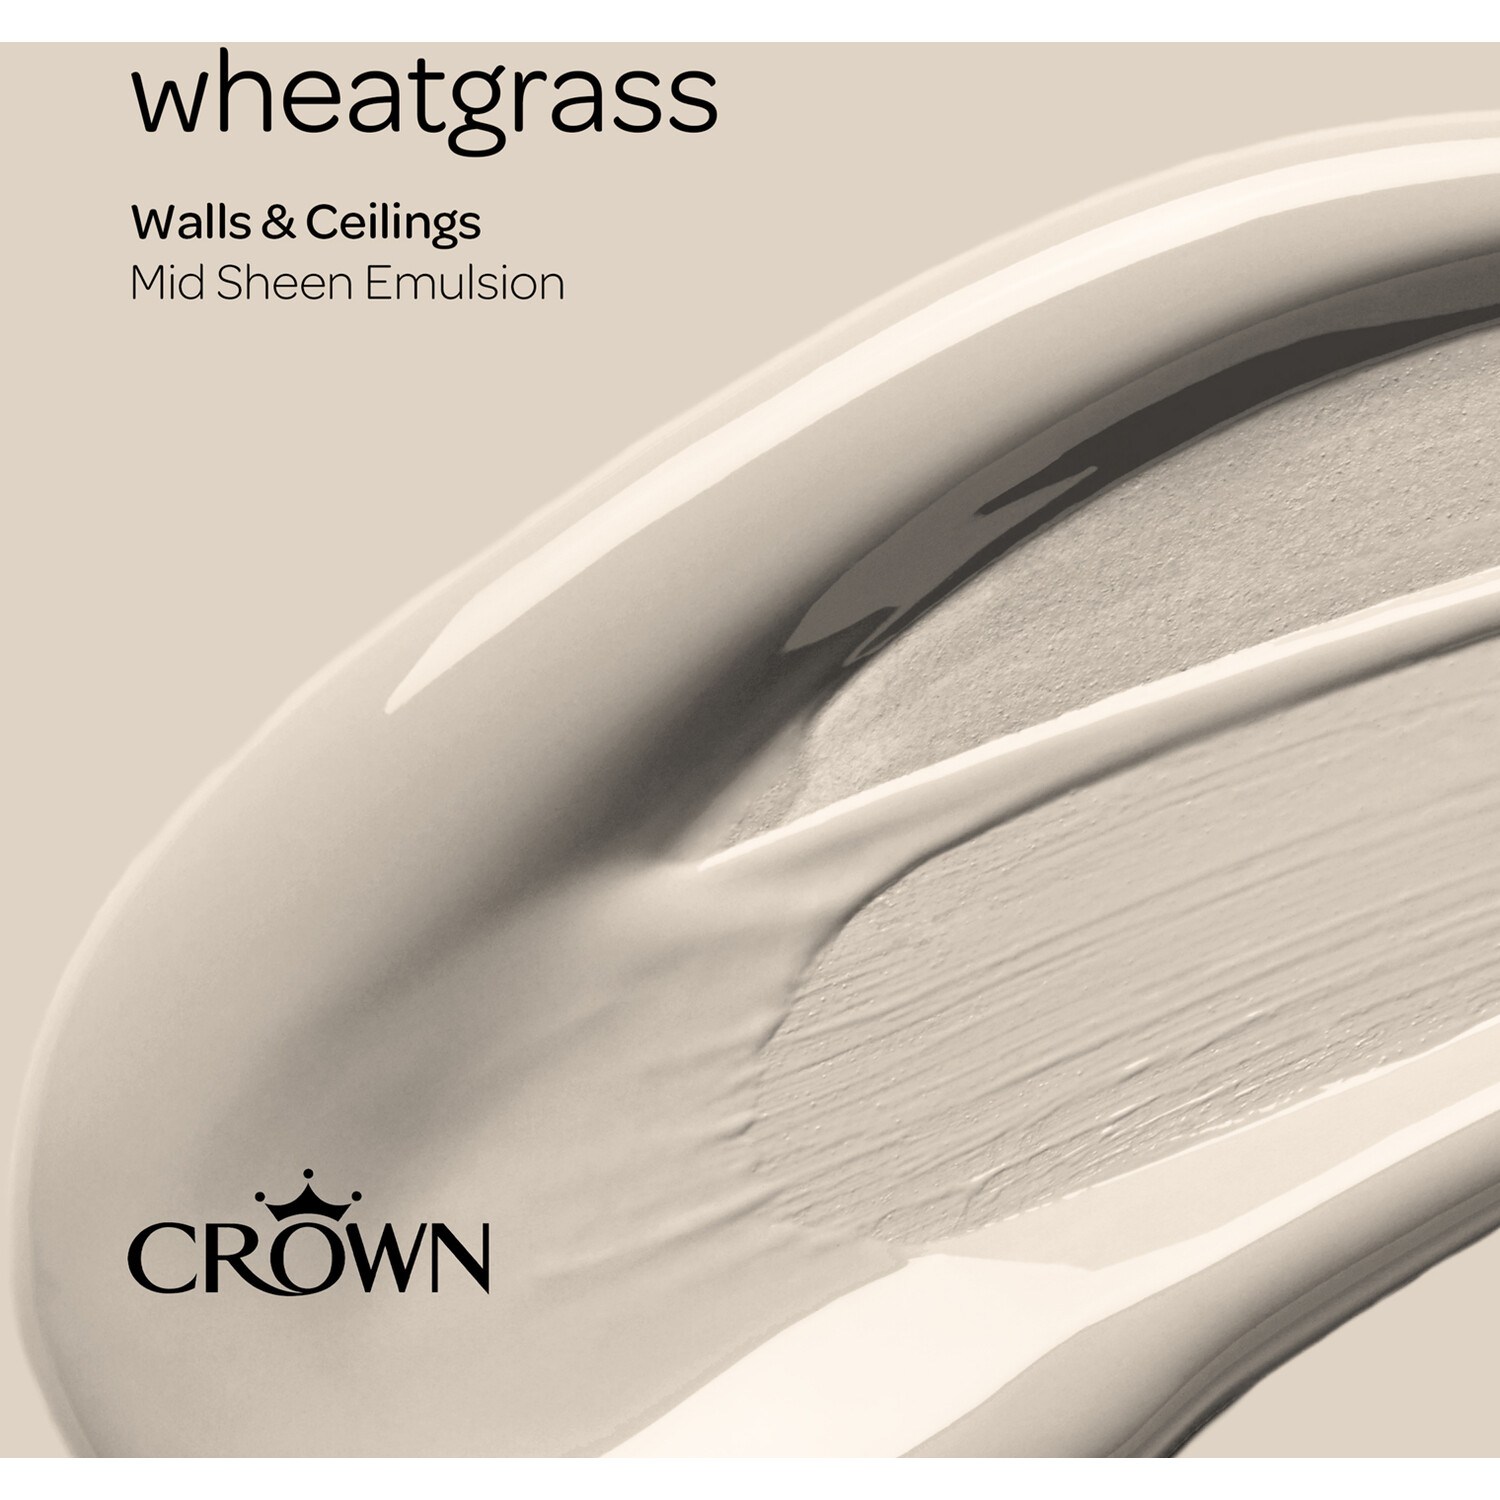 Crown Walls & Ceilings Wheatgrass Mid Sheen Emulsion Paint 5L Image 4